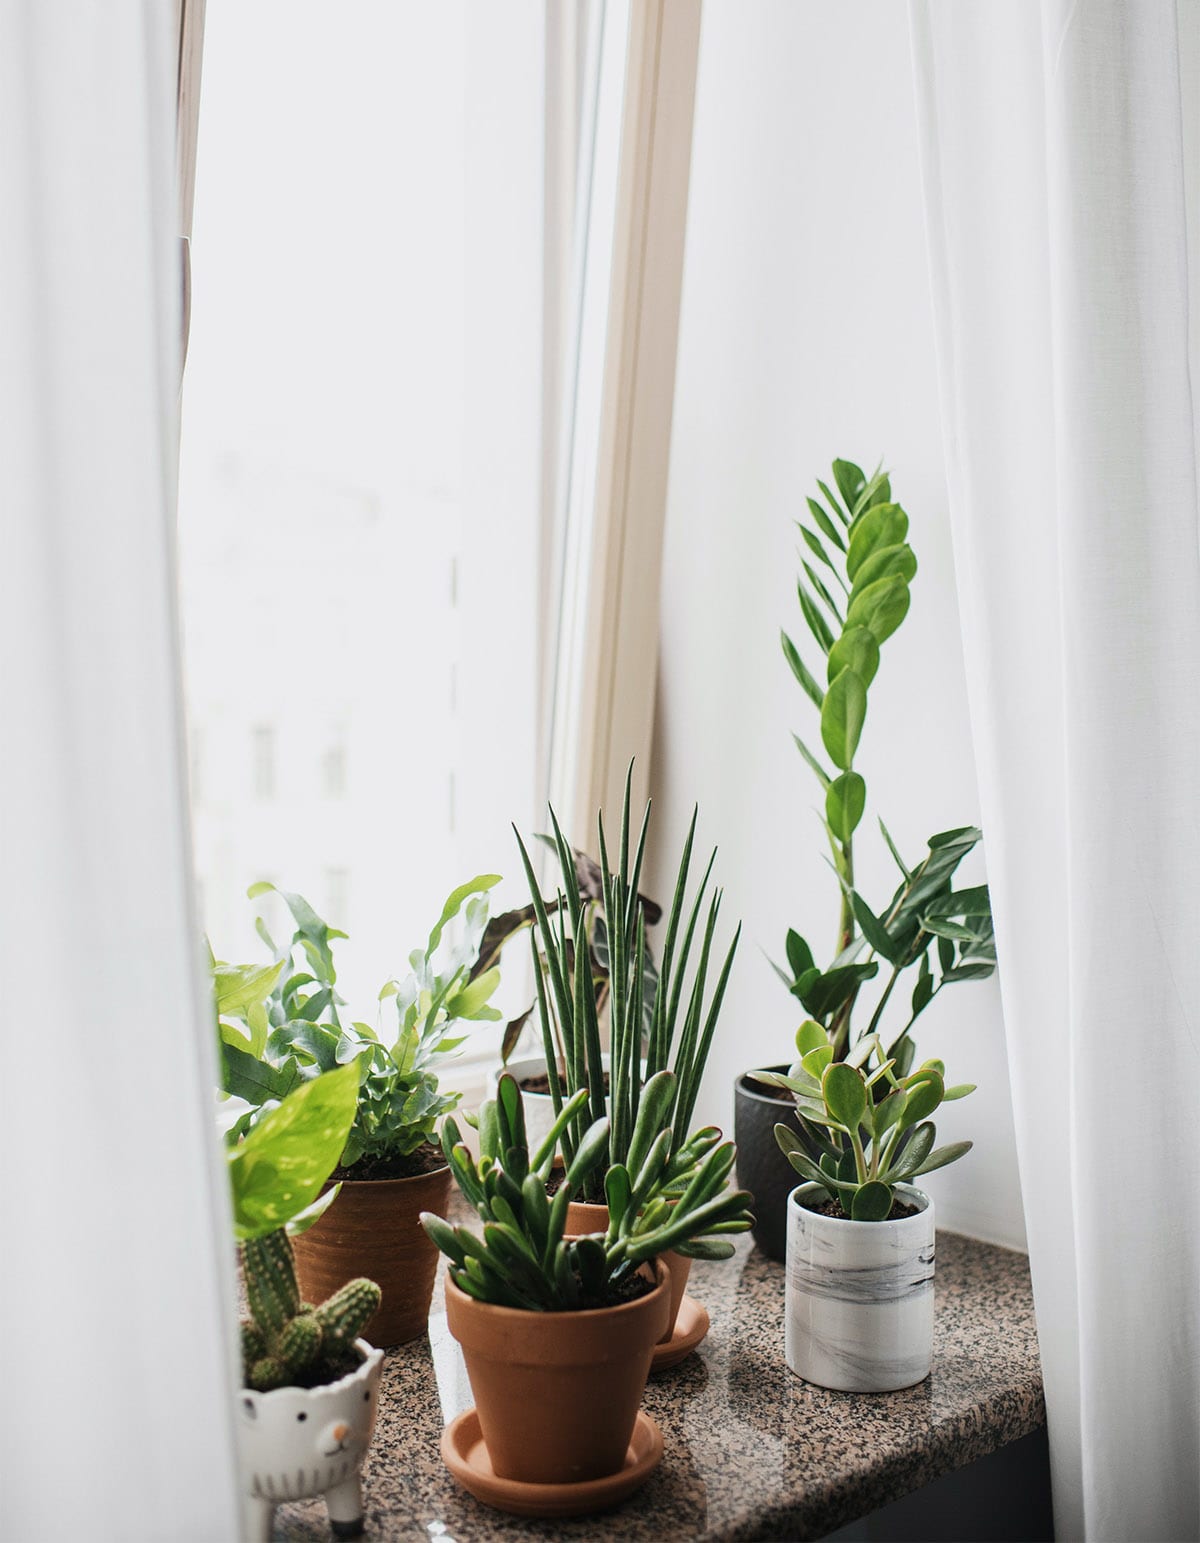 Why plant care is self-care